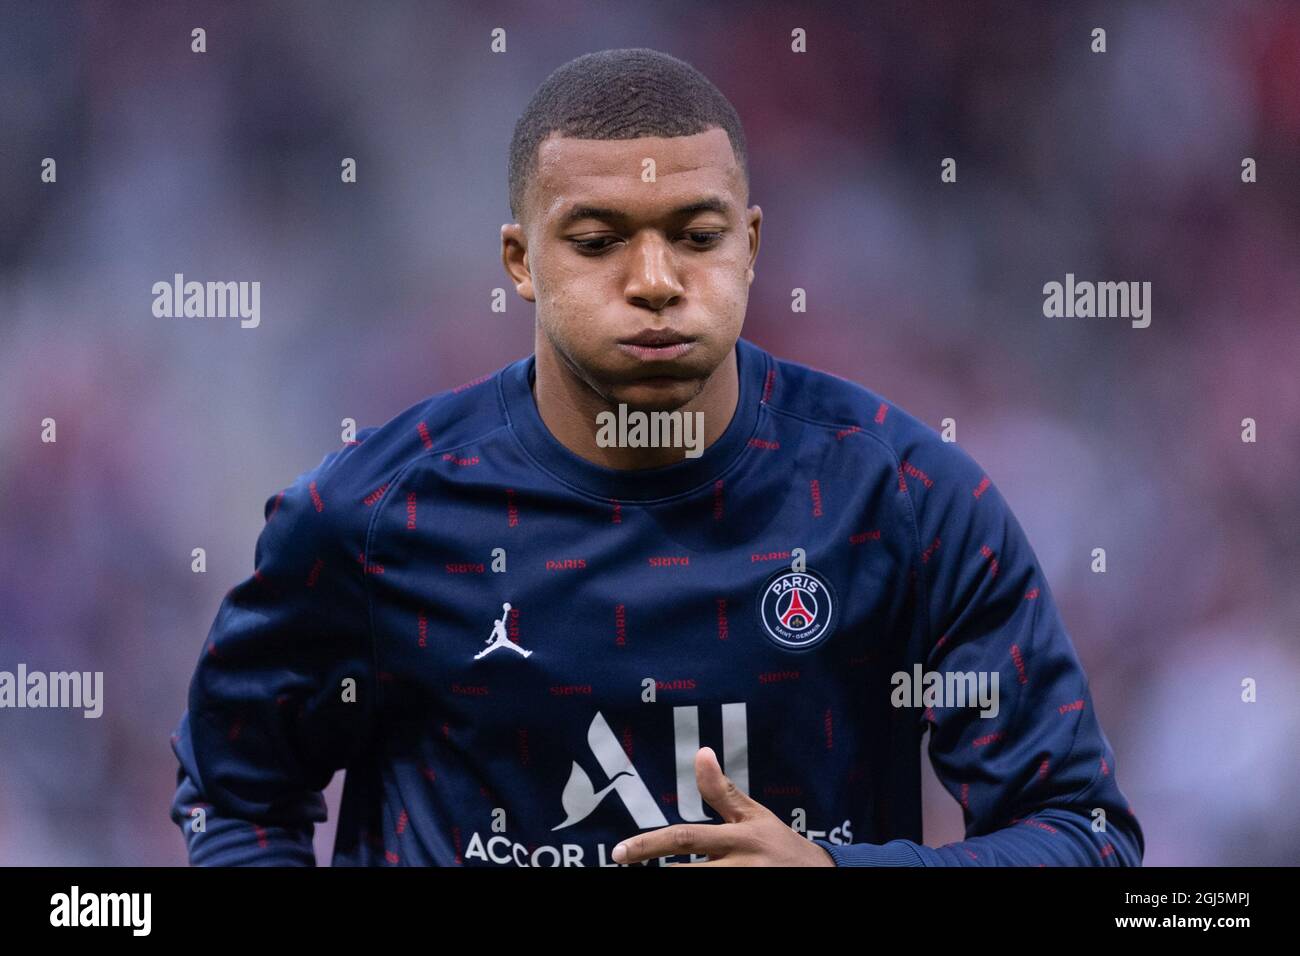 07 Kylian MBAPPE (psg) during the Ligue 1 Uber Eats match between